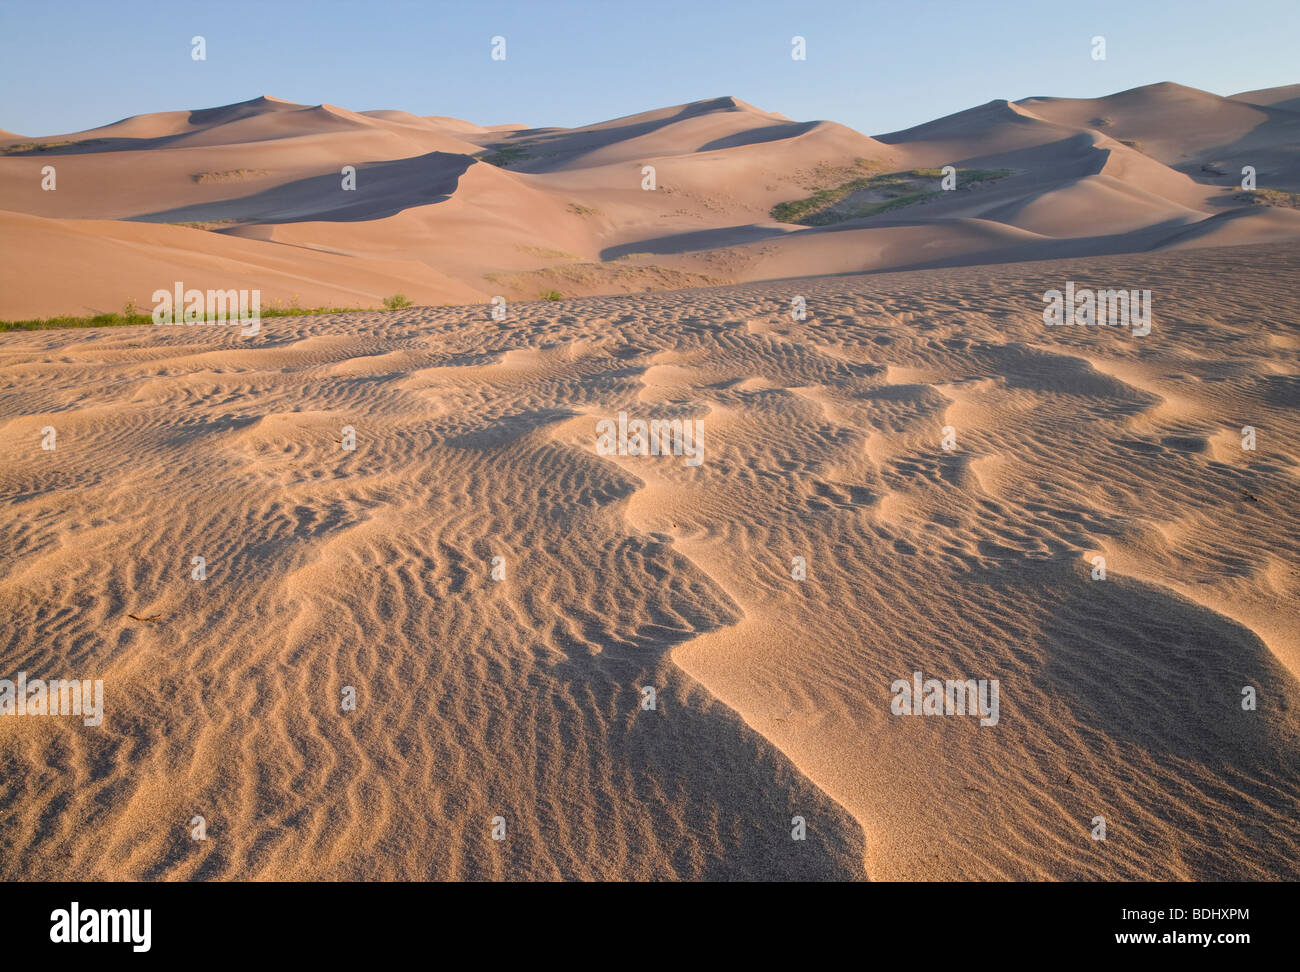 sand patterns and dunes, Great Sand Dunes National Park, Colorado Stock Photo